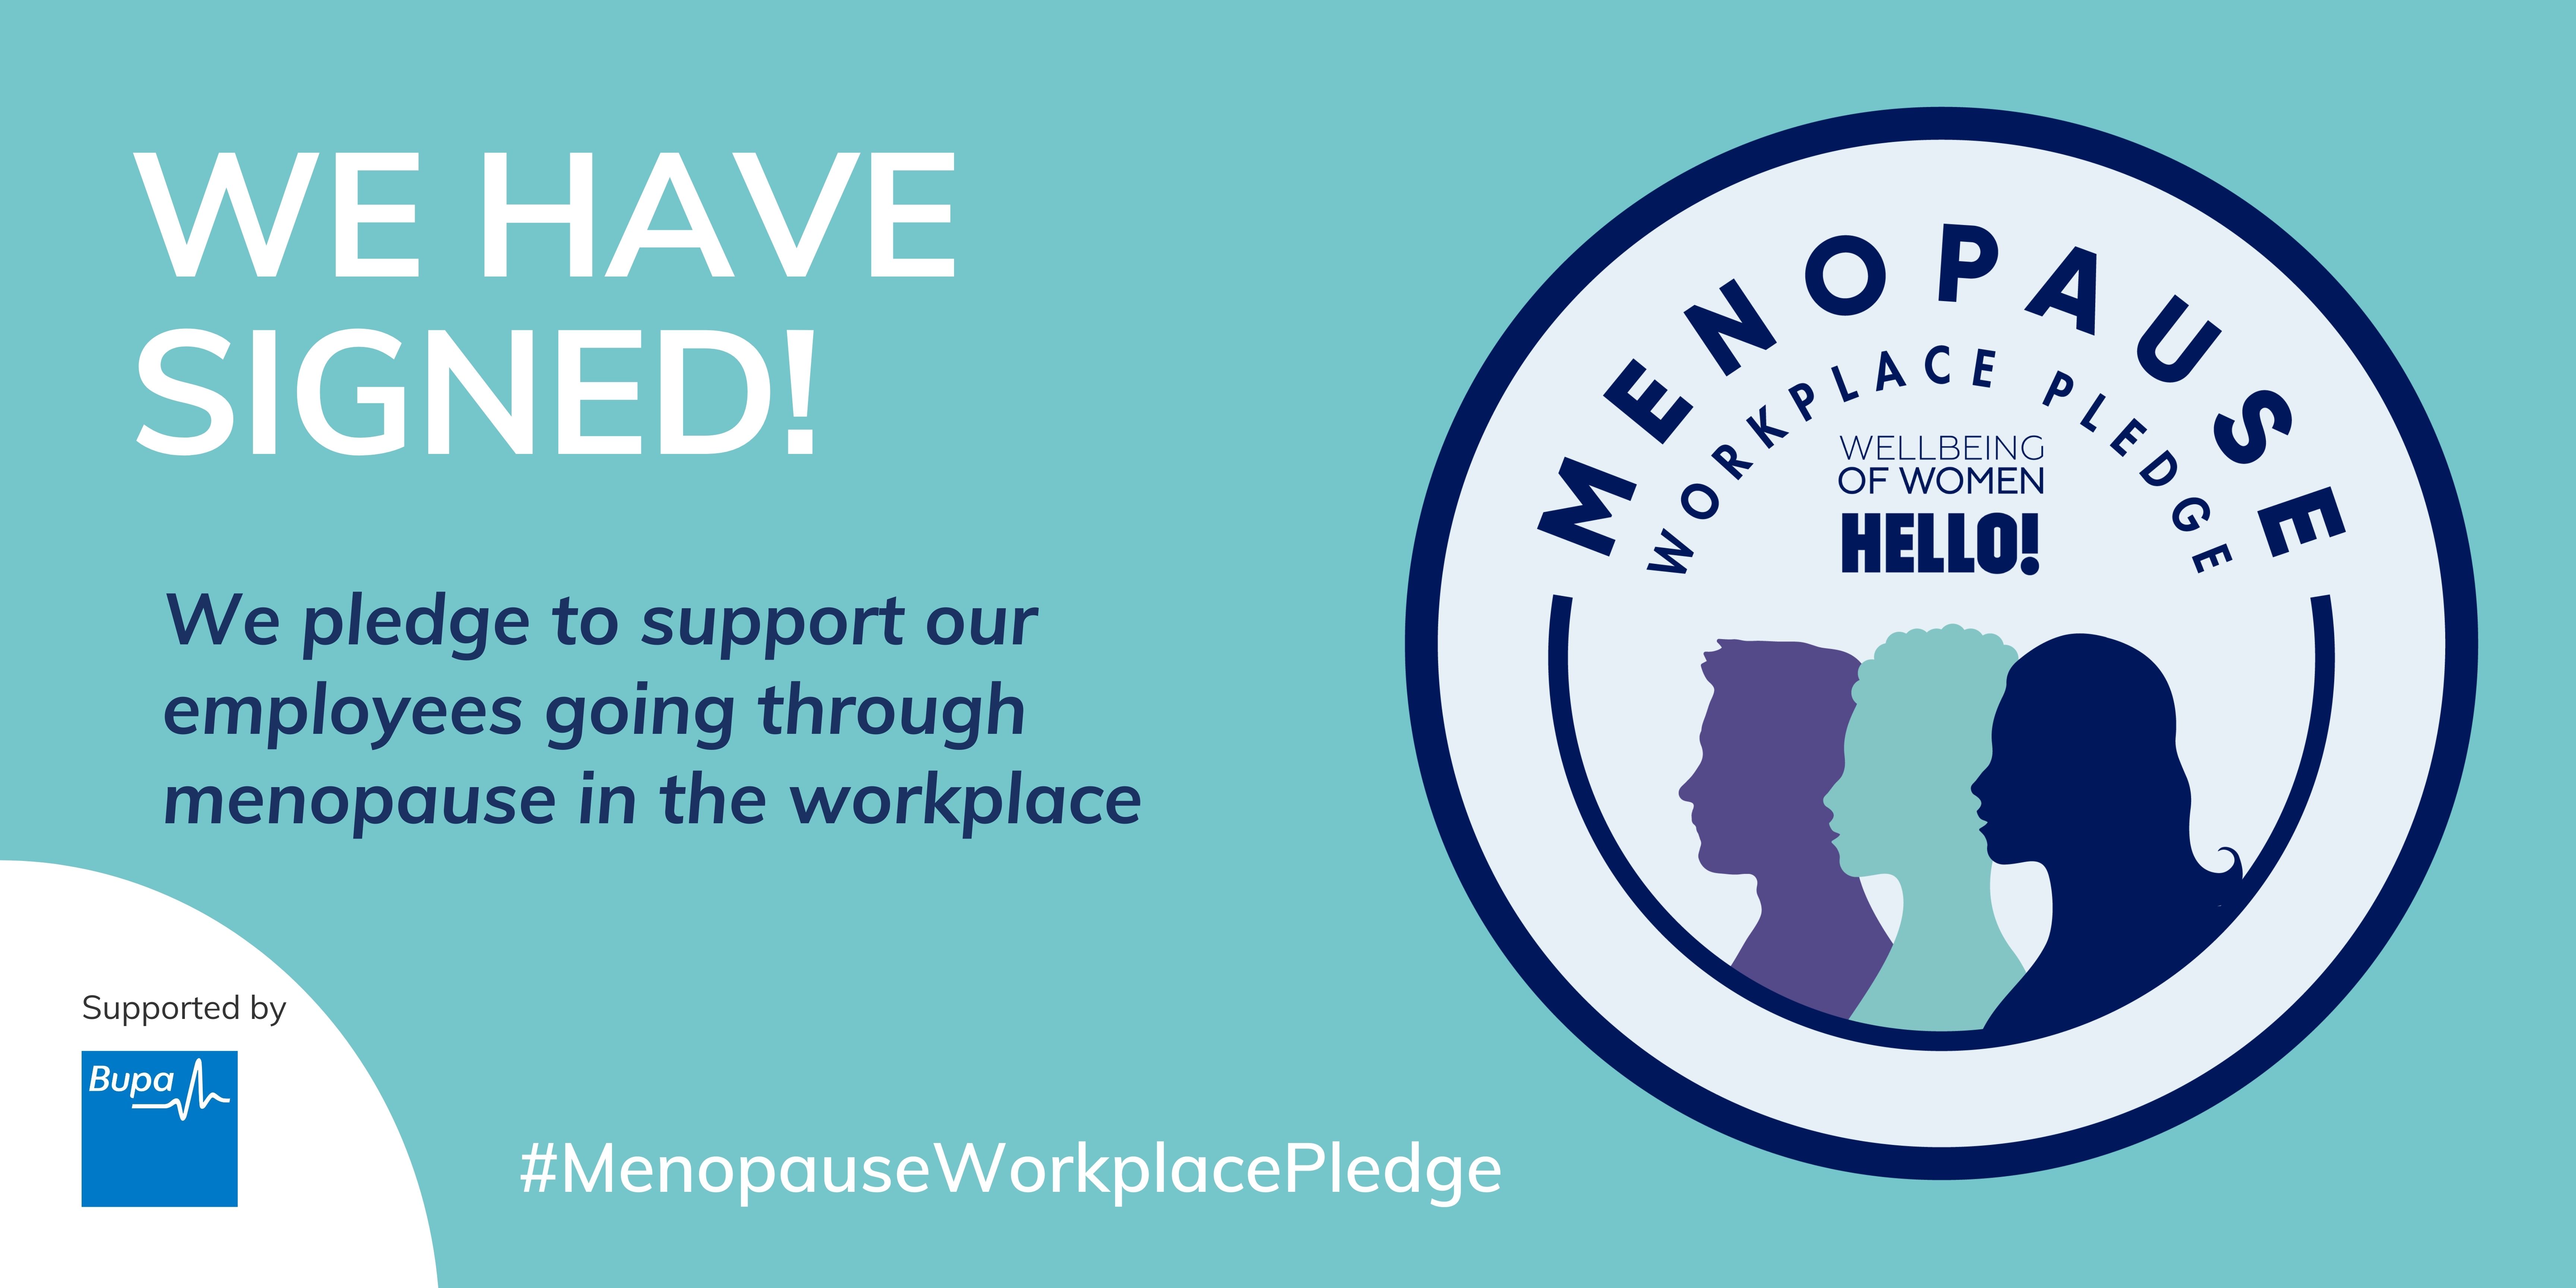 We have signed! We pledge to support our employees going through the menopause in the workplace #menopauseworkplacepledge